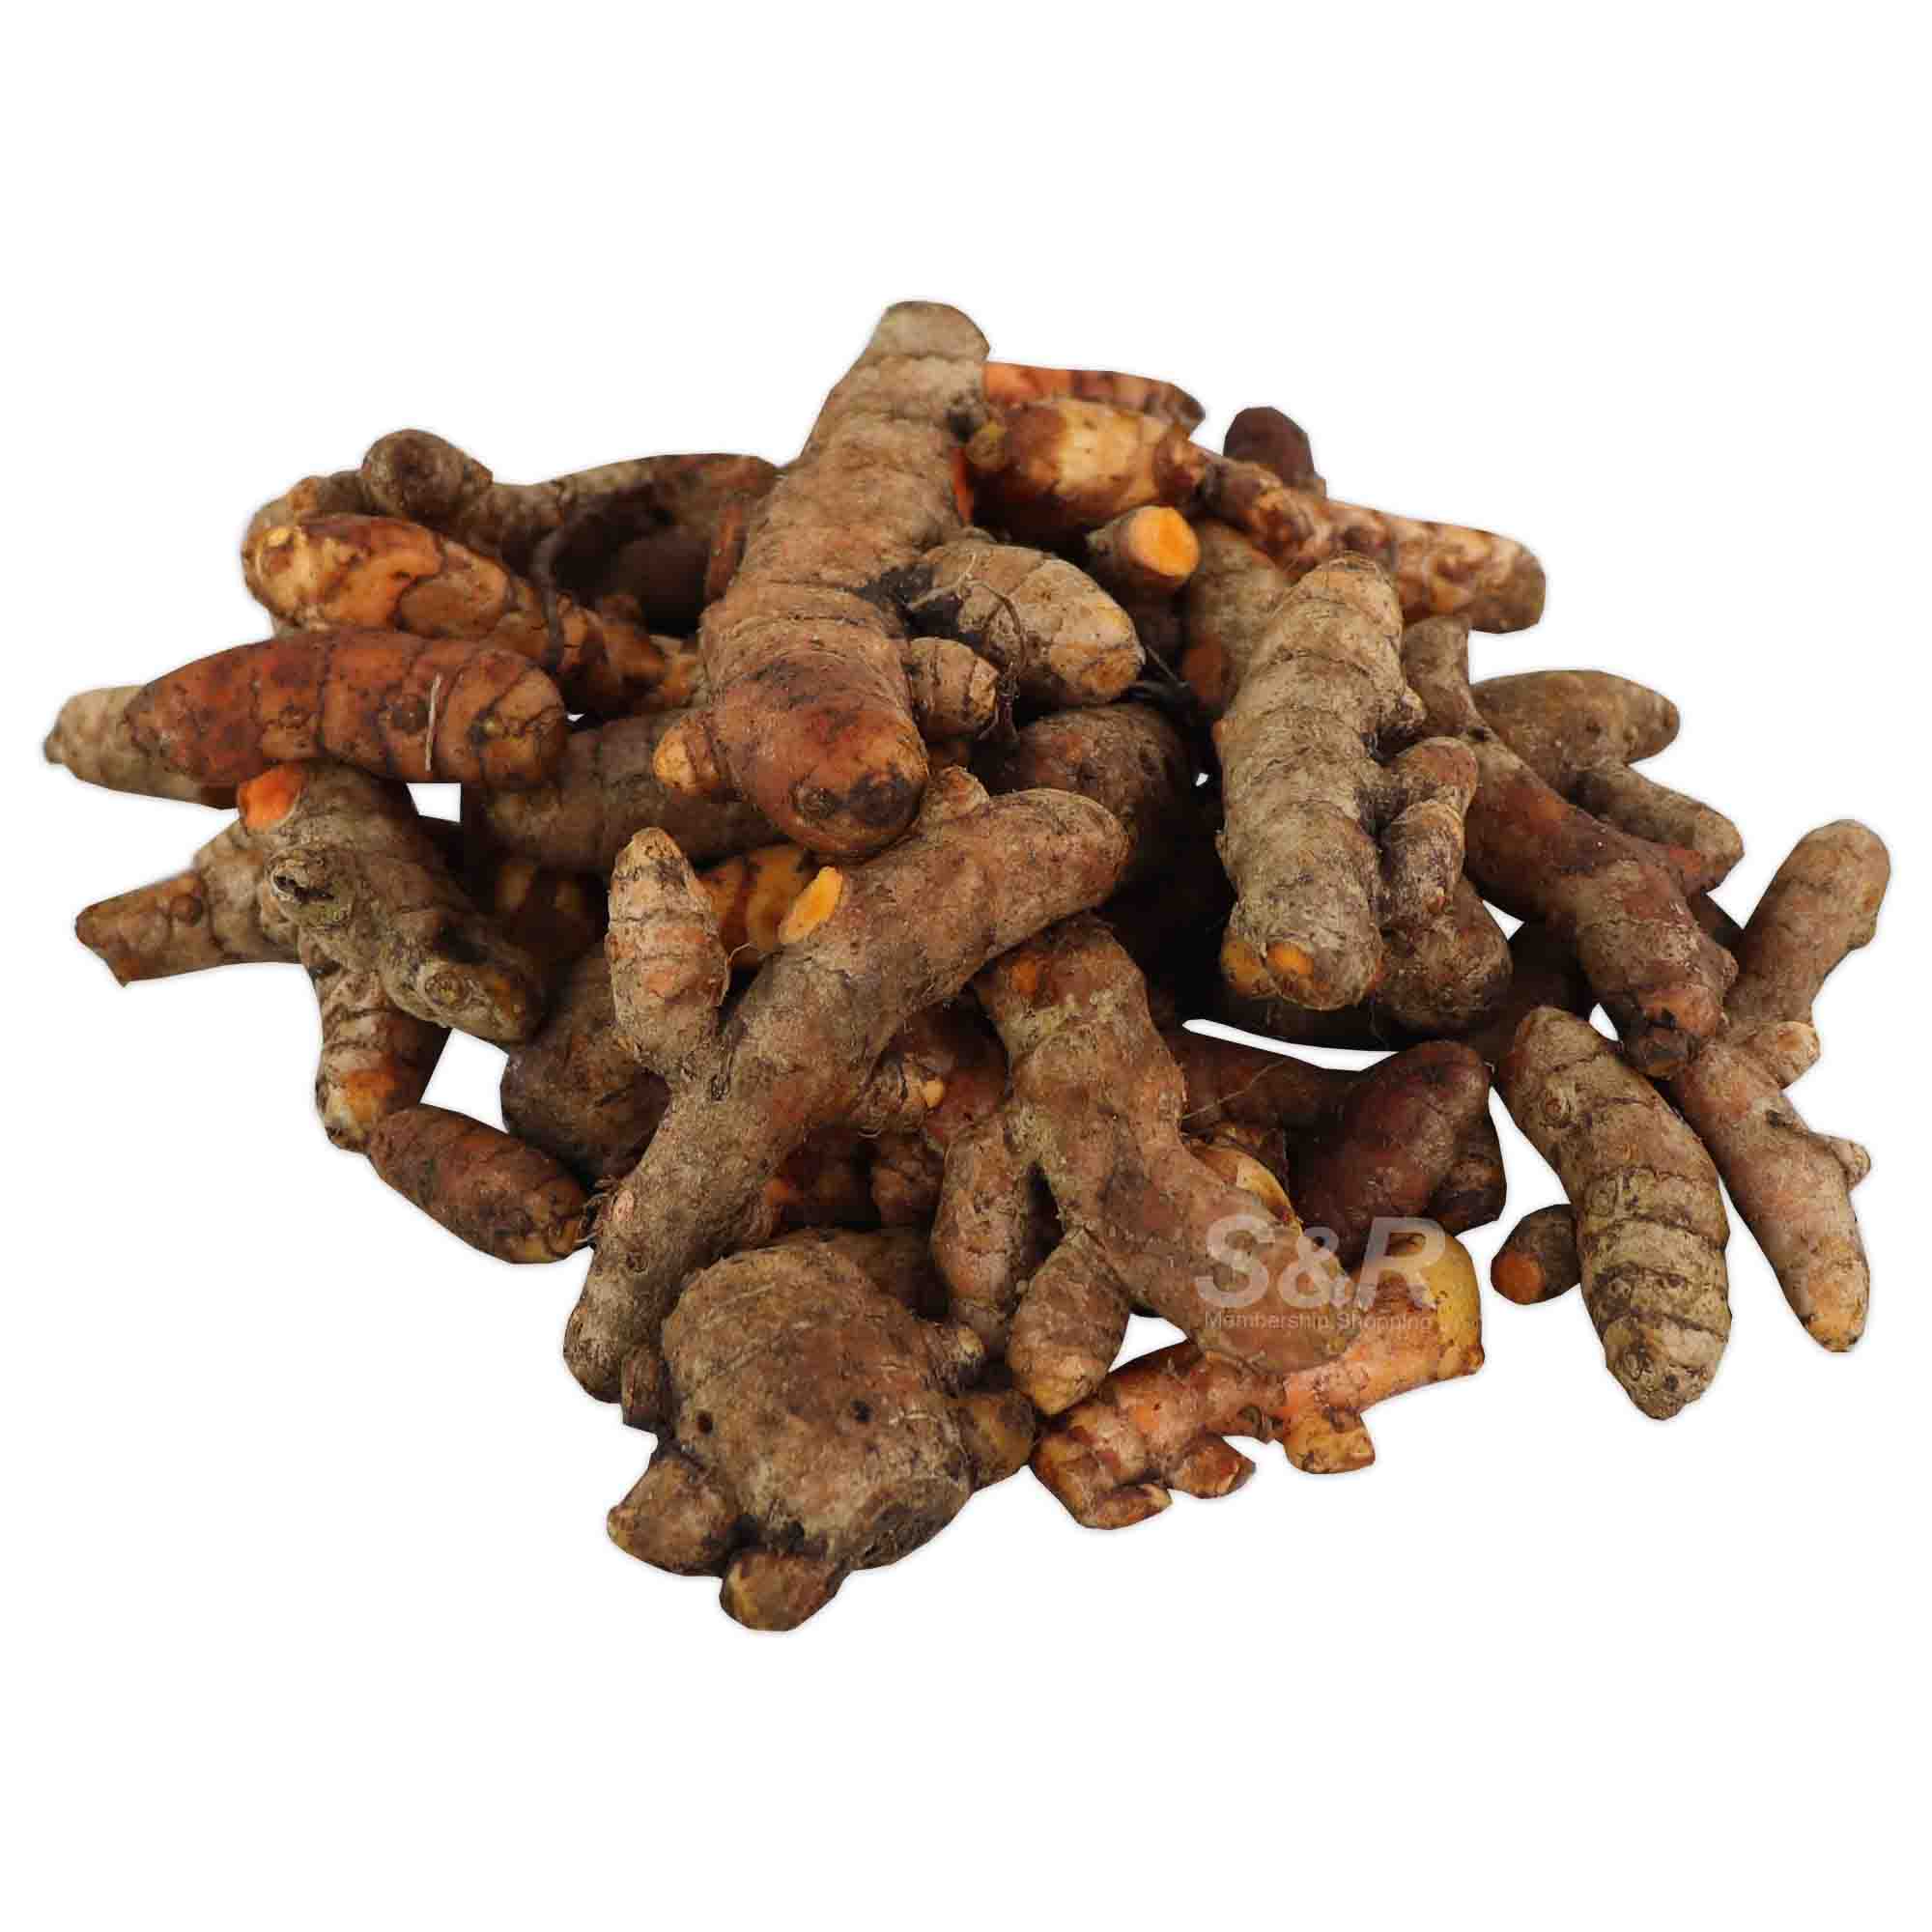 S&R Ginger Turmeric approx. 850g